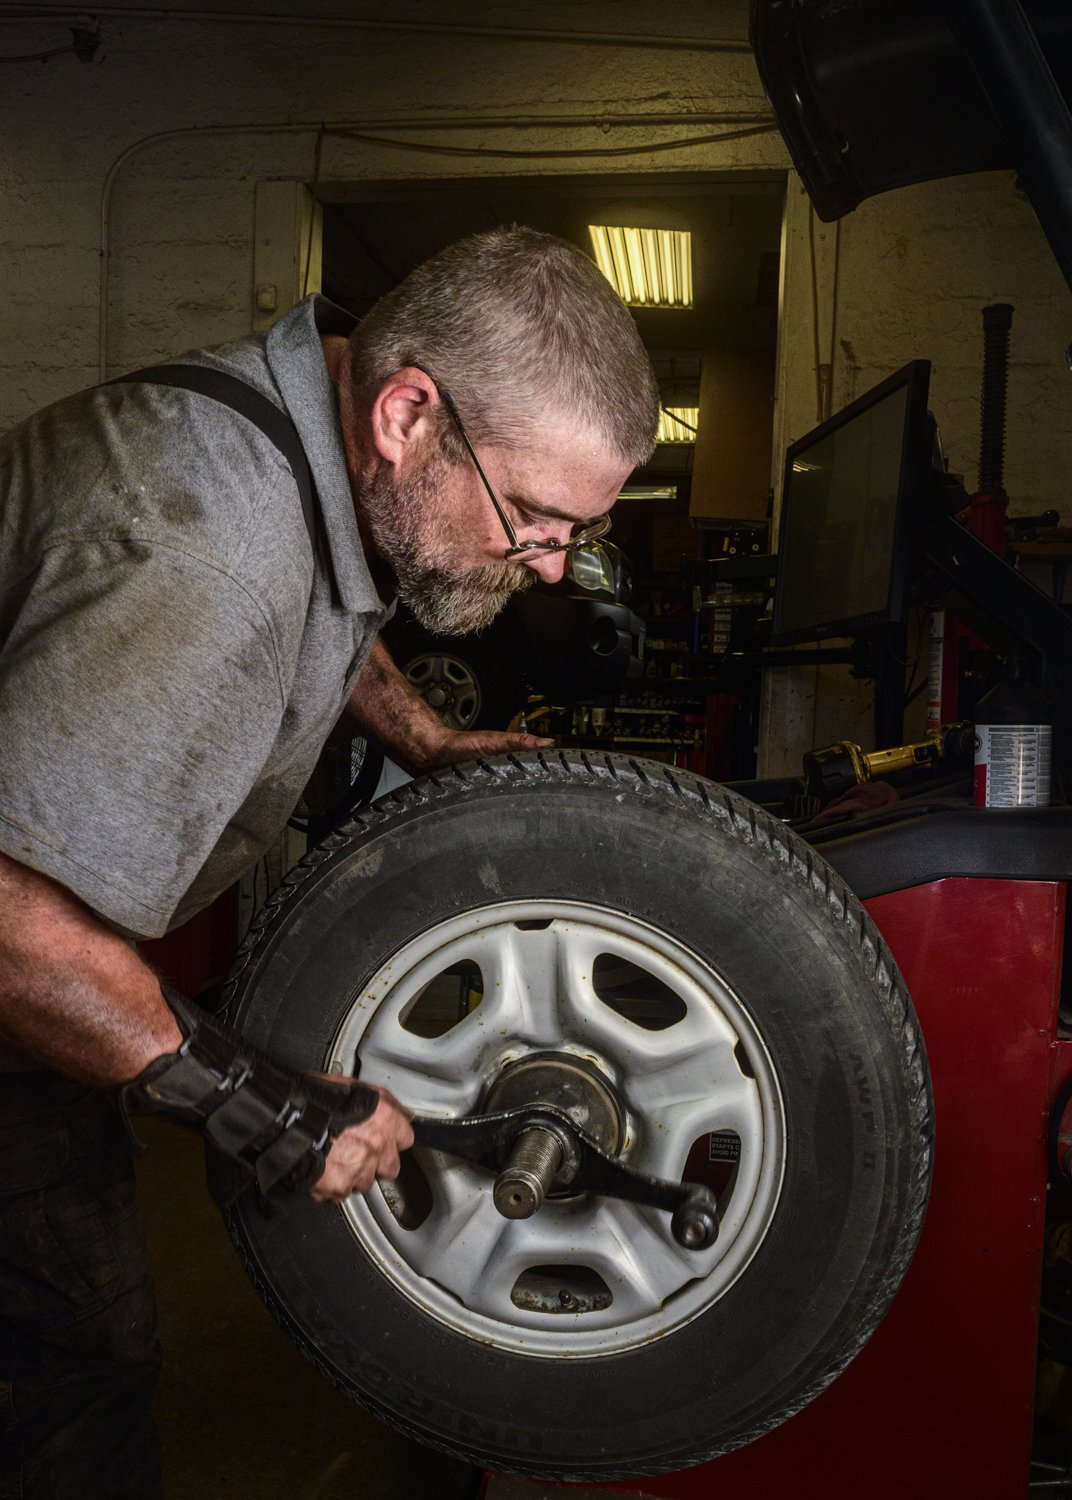  Joel Stevenson balances the tires off of a 2008 Toyota Tacoma at Pleasant Street Tire and Auto Service in Cynthiana, Kentucky on Wednesday, June 16, 2021.    Stevenson has been working at the establishment for approximately one month and recently mo